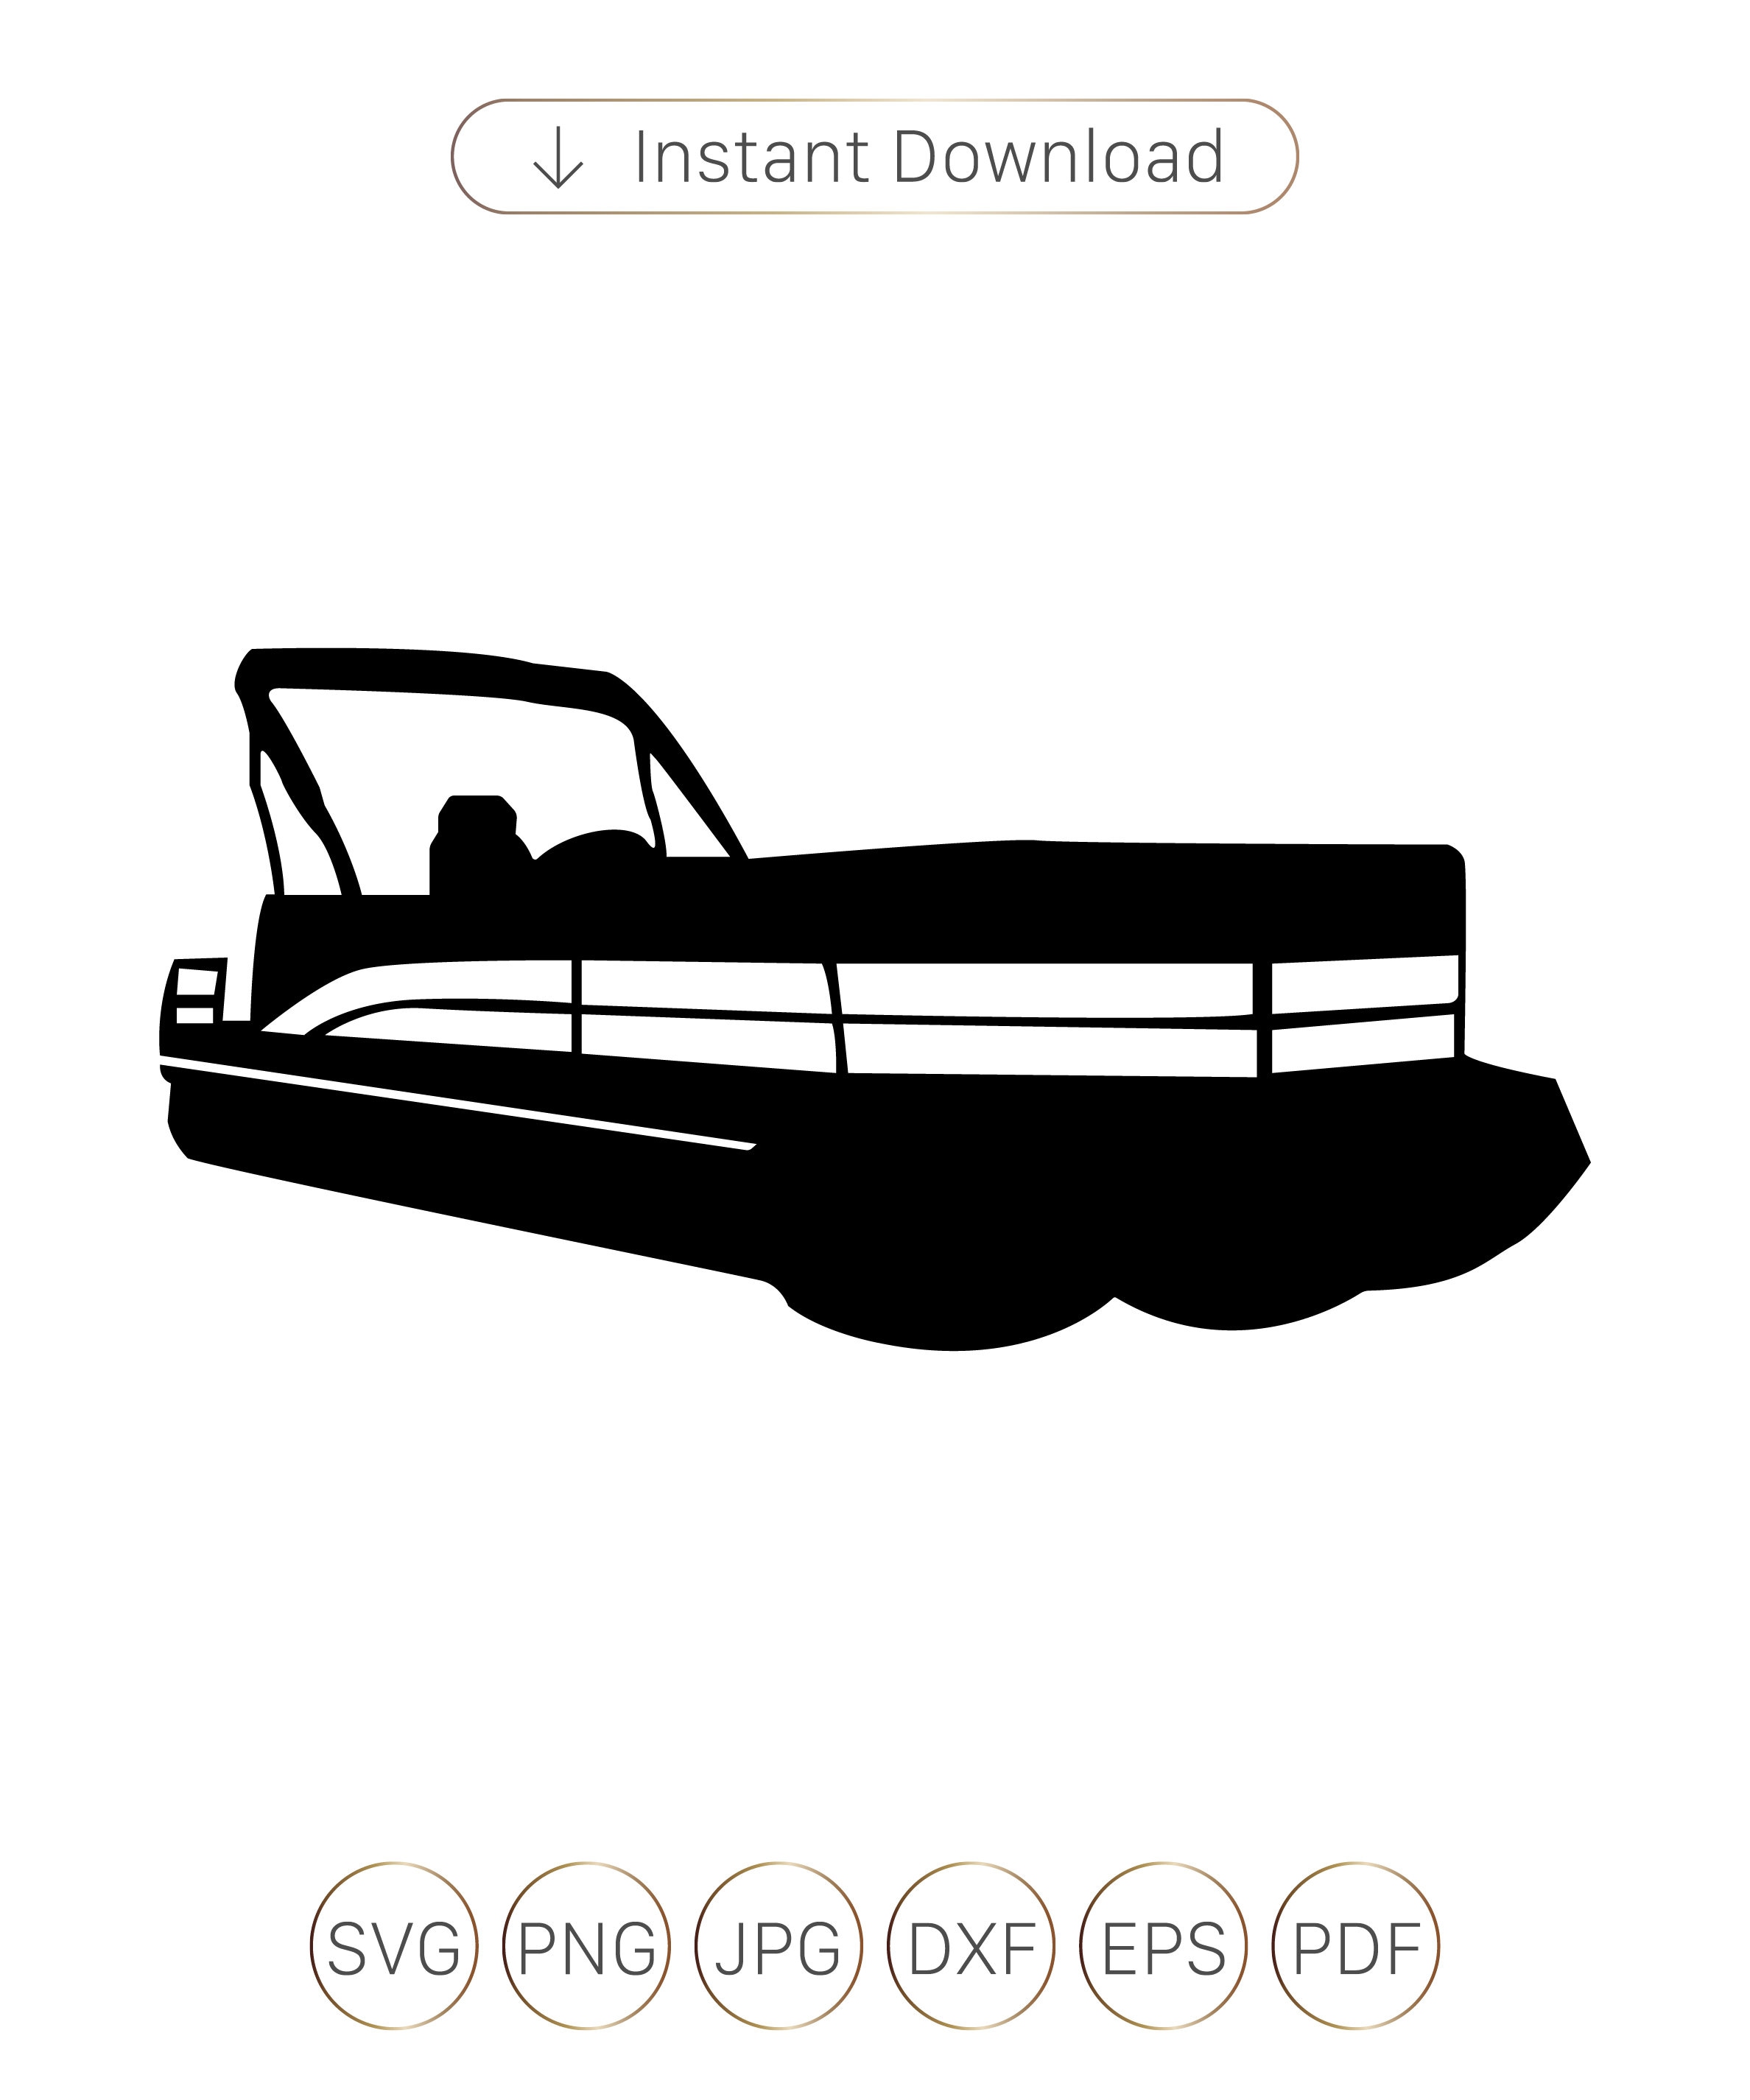 Pontoon Boat 6 Svg Pontoon Boat Svg Pontoon Boat Clipart Etsy Images ...